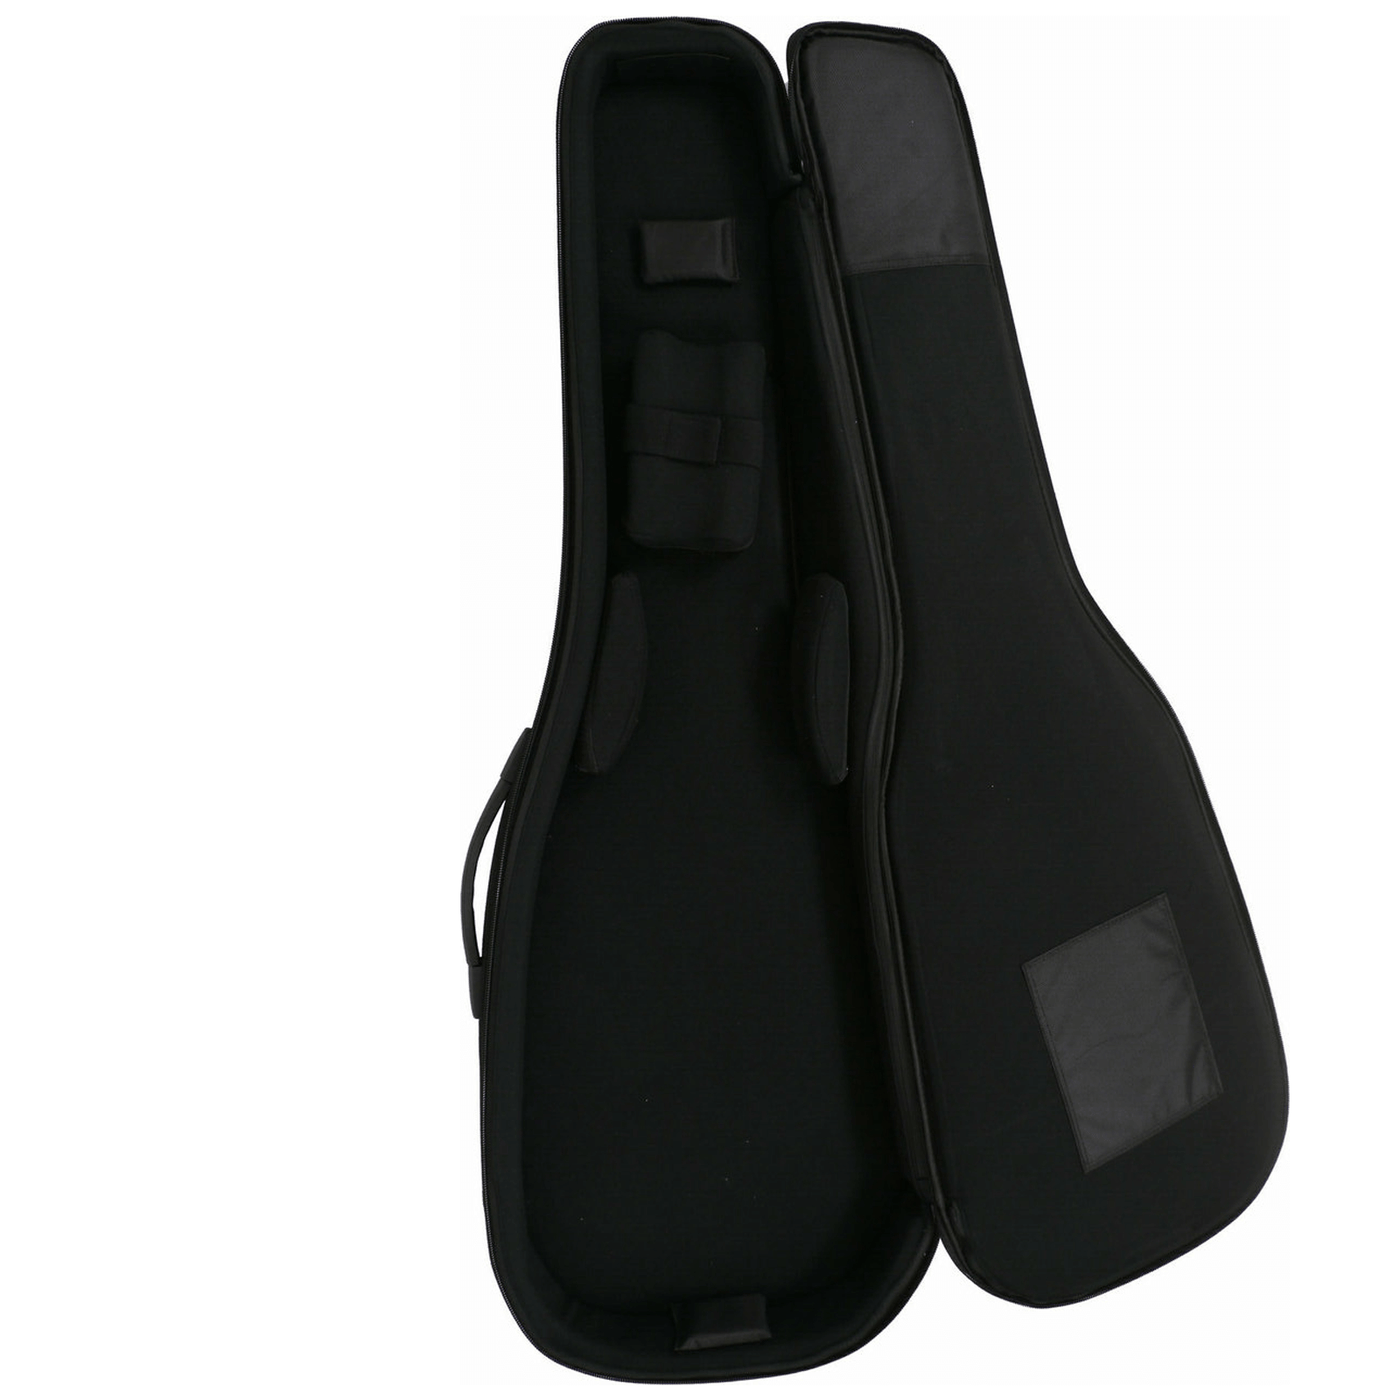 Sire Gig Bag - Funda de Bajo Eléctrico - Gig bag for V series basguitars. Designed for easy transport and protection of the instrument. Features robust zip-fastener, ergonomic handle, and compartment for accessories, etc. Features • Para los modelos M, P